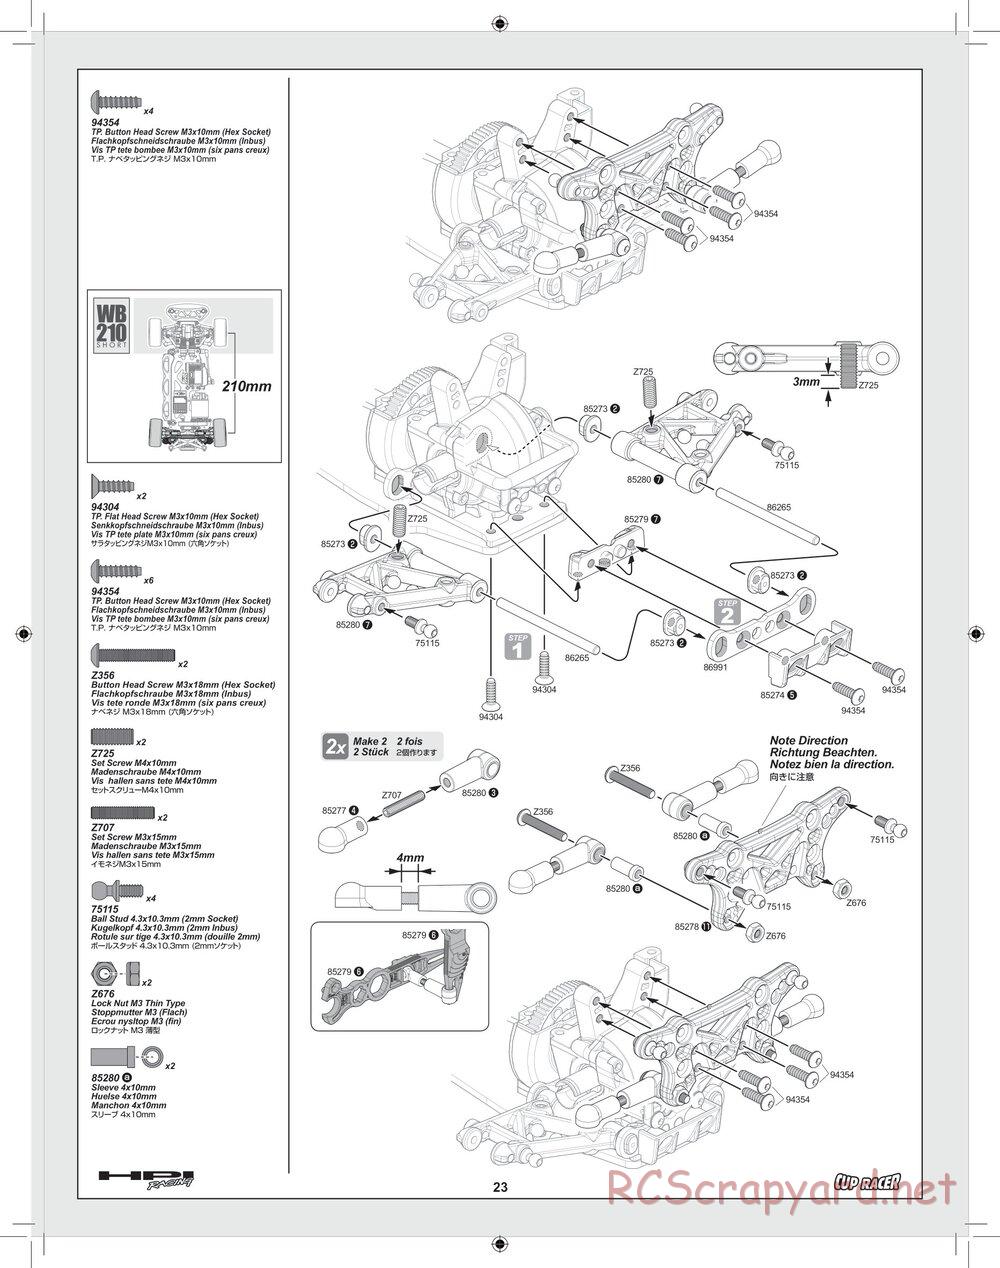 HPI - Cup Racer - Manual - Page 23